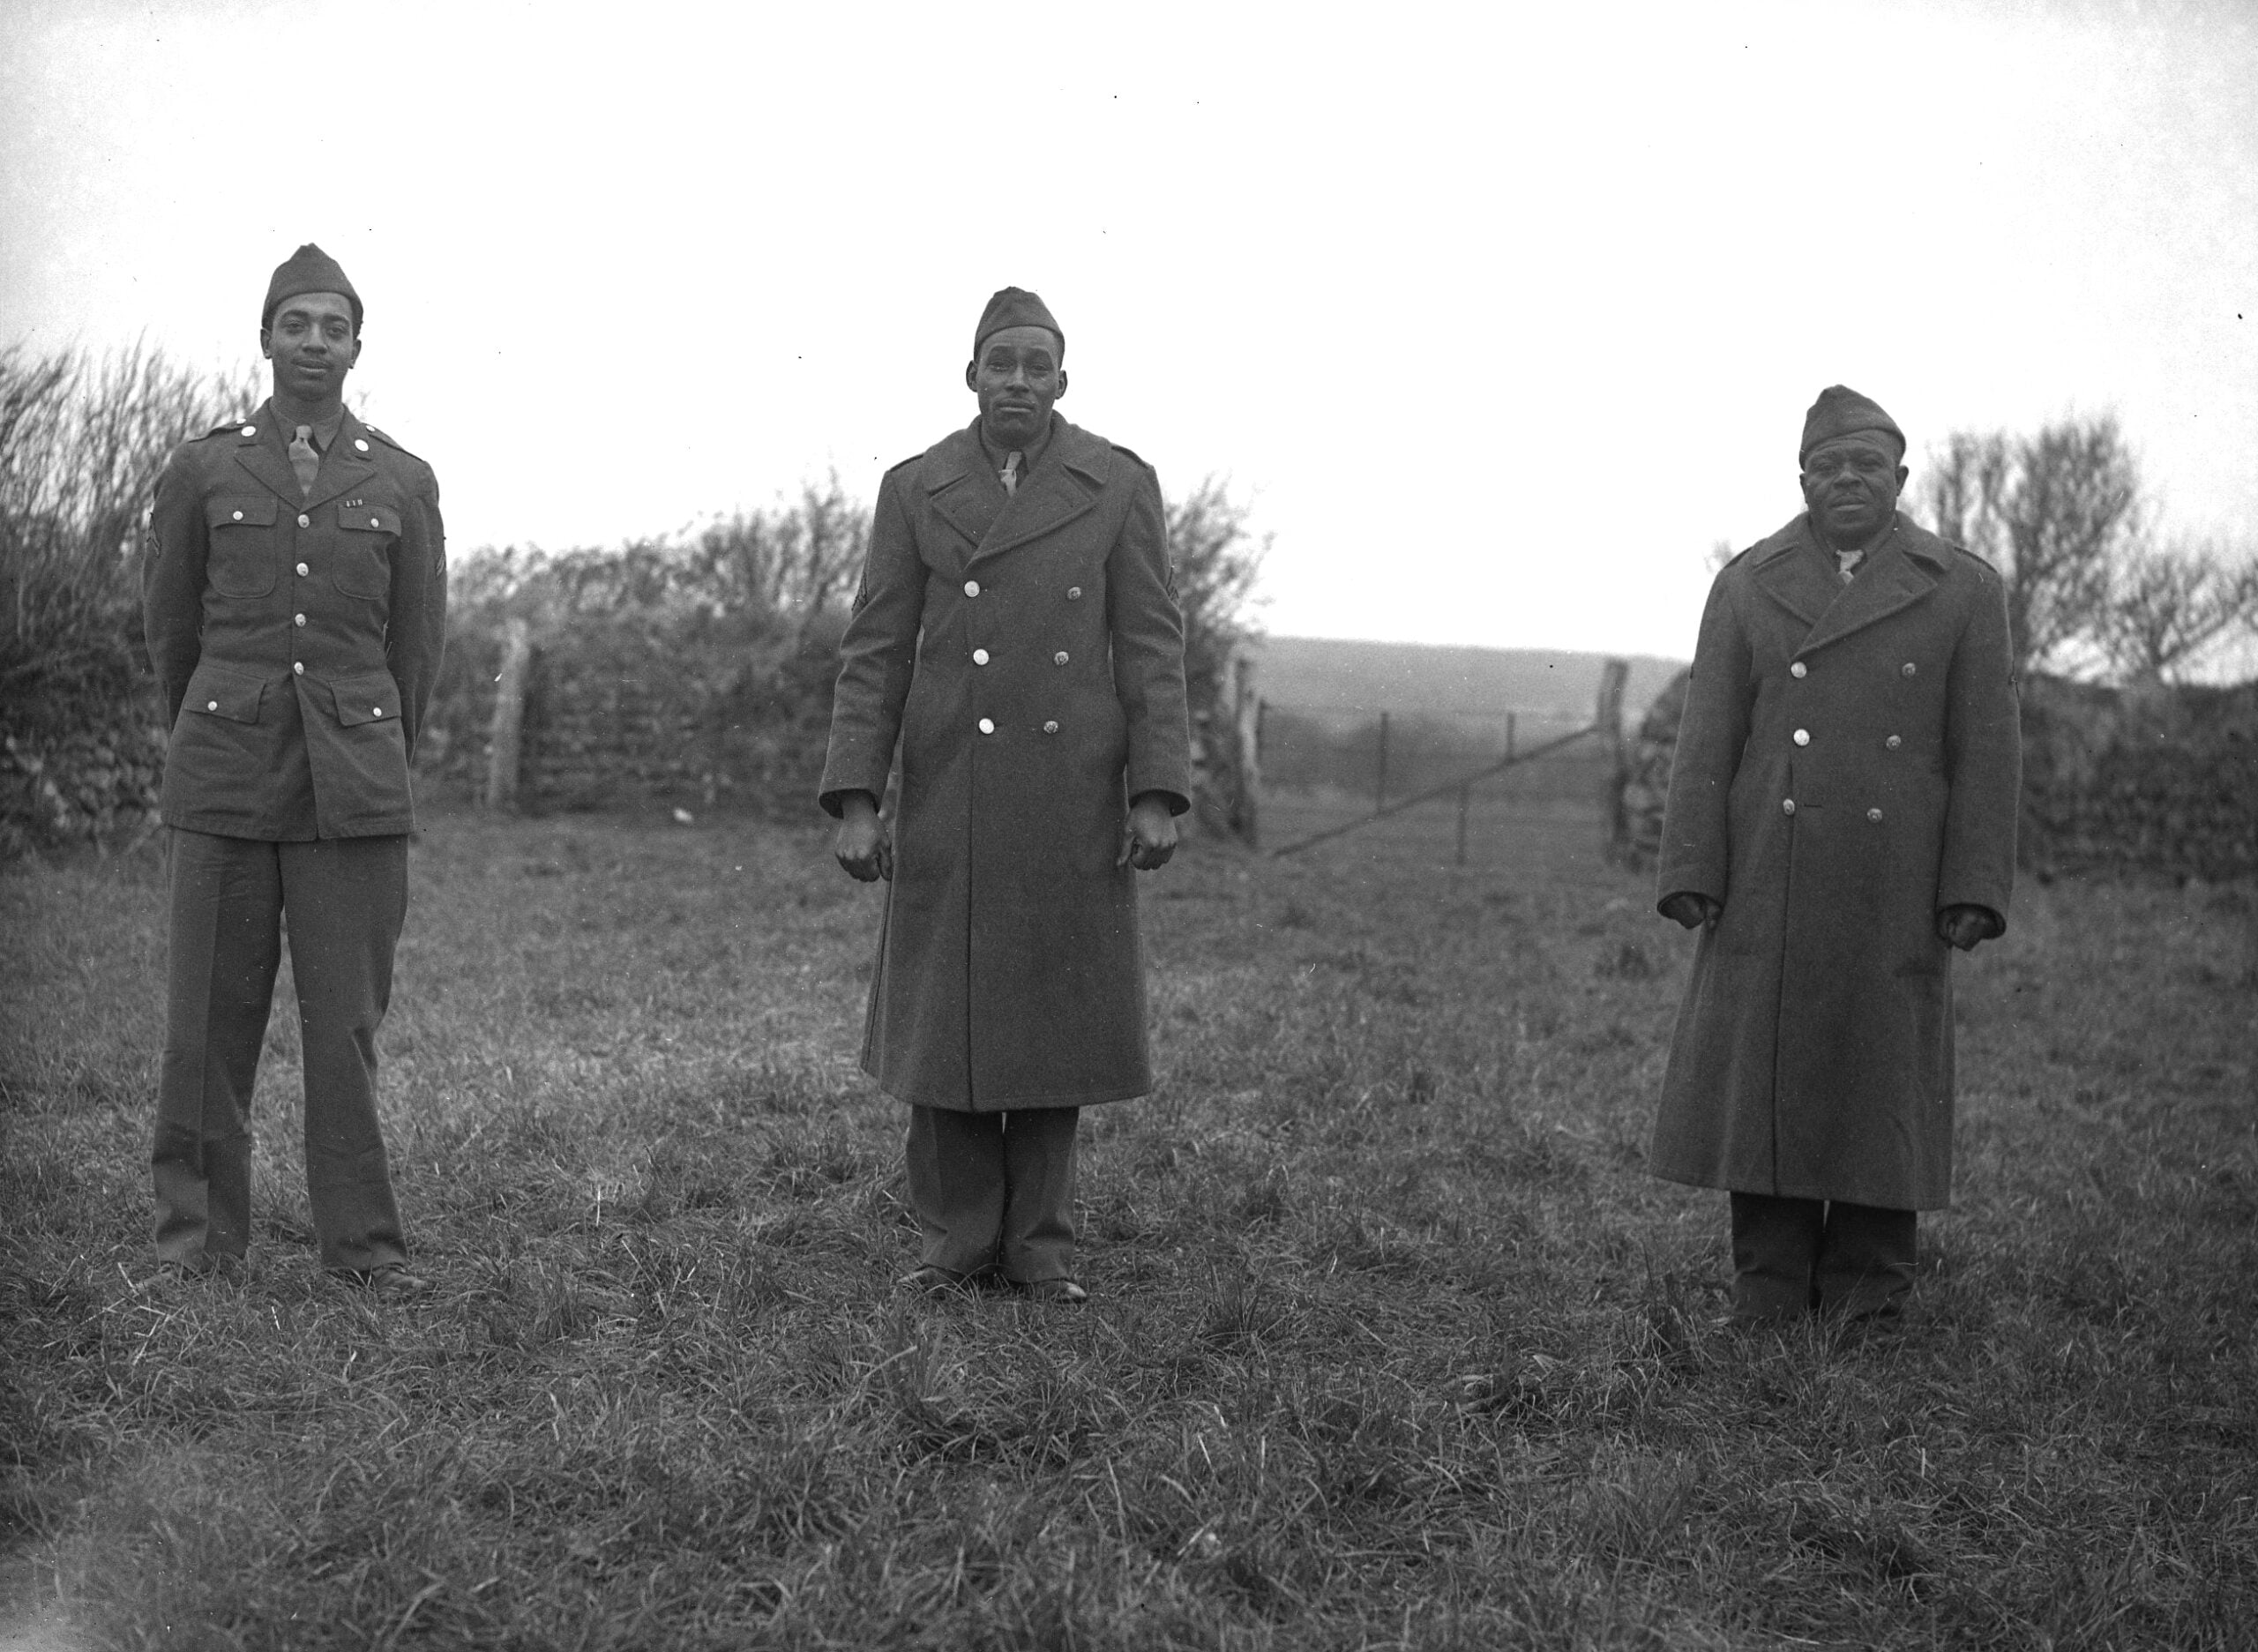 Three Black American world war two soliders standing in a field and looking at the camera.